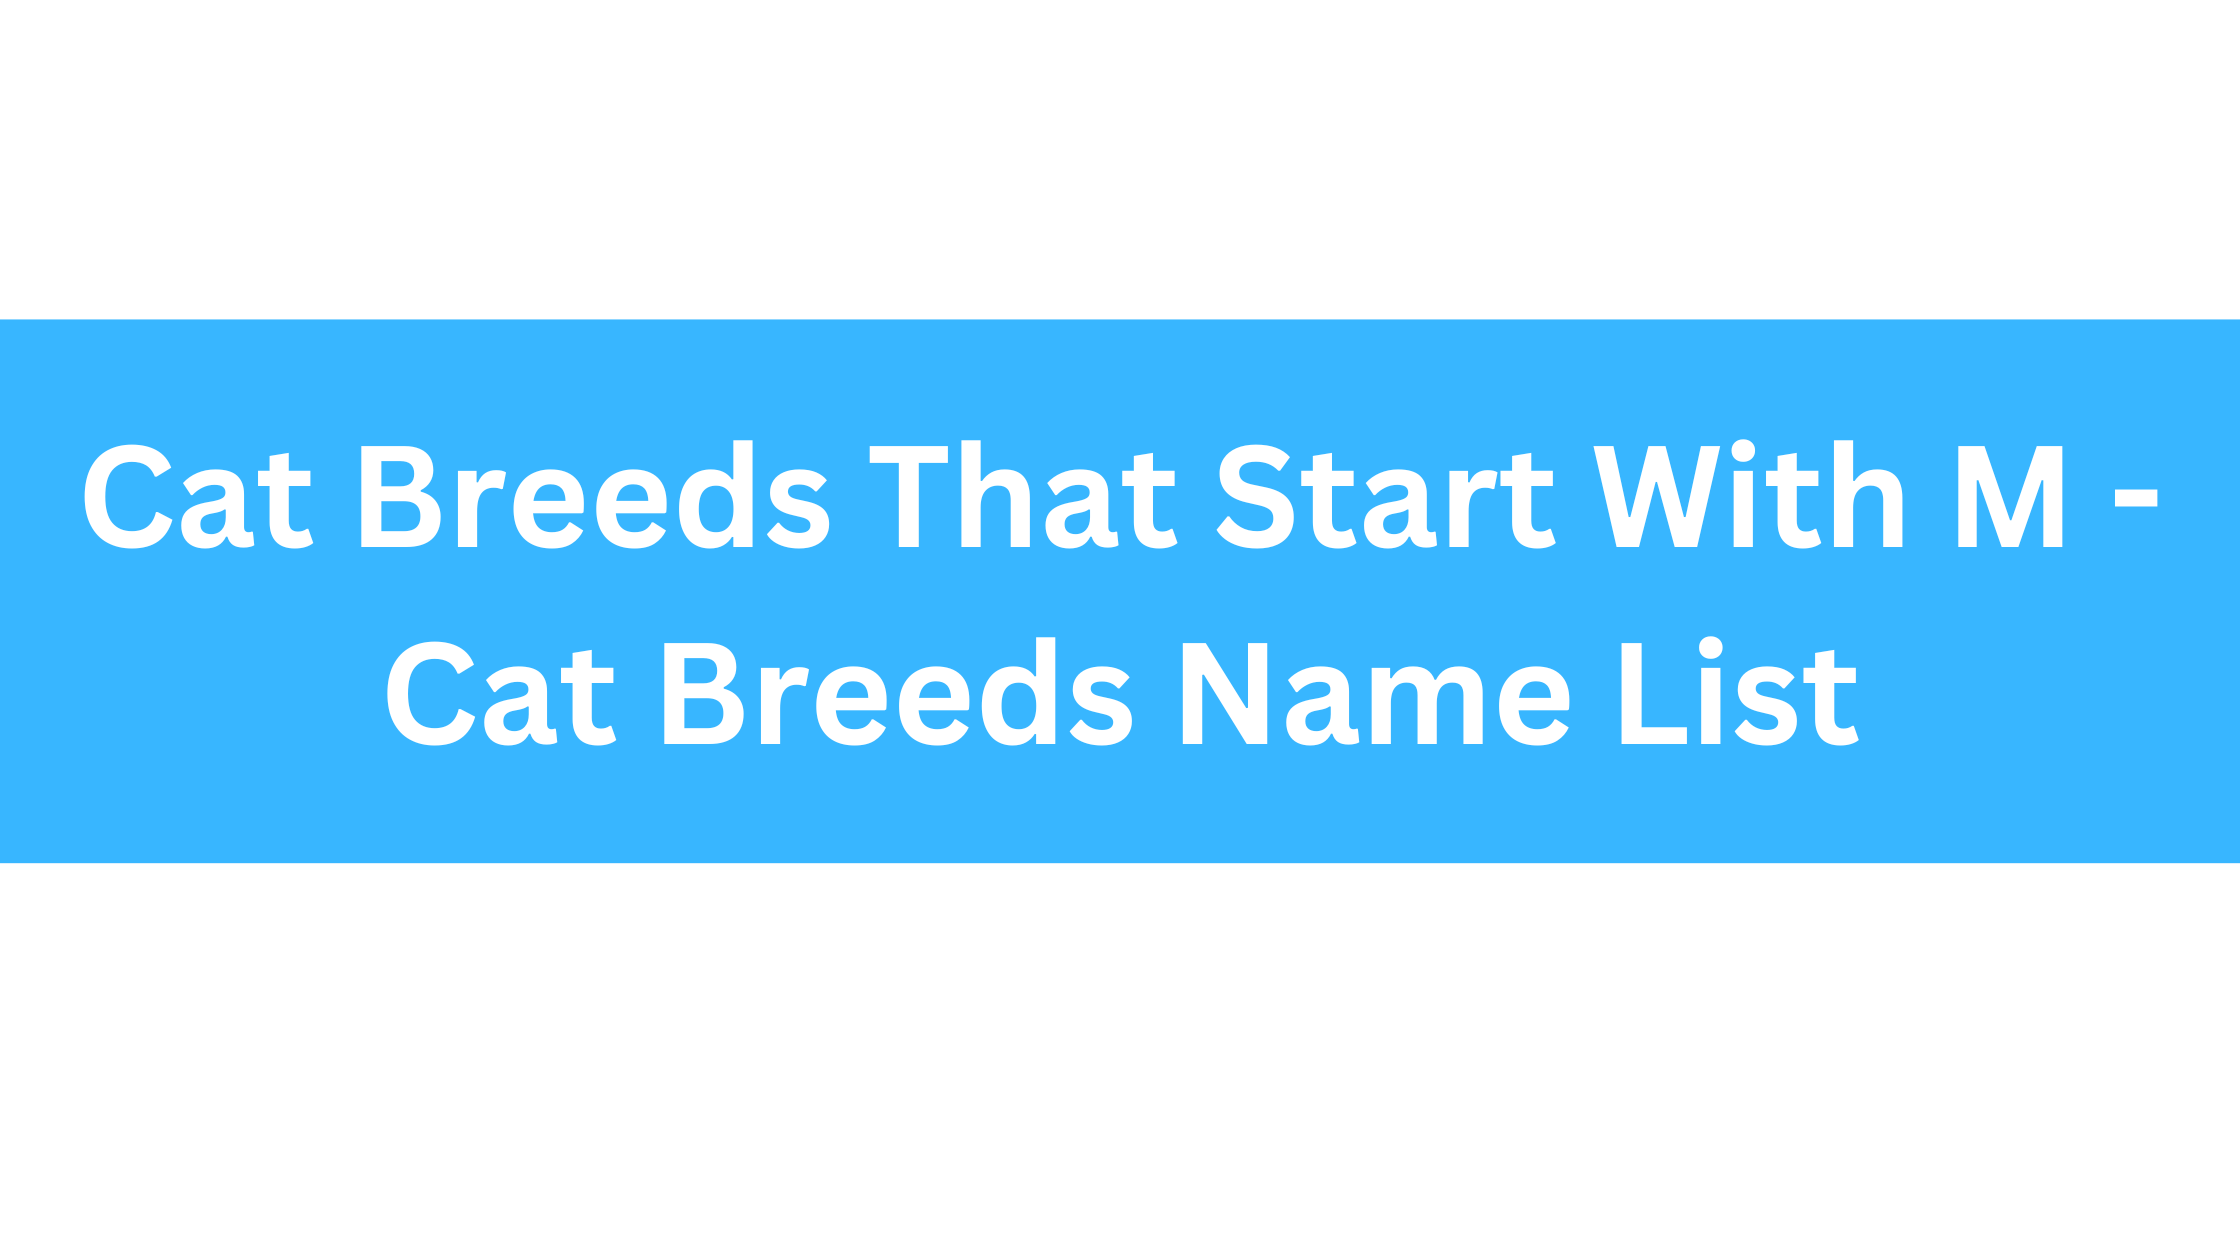 Cat Breeds That Start With M